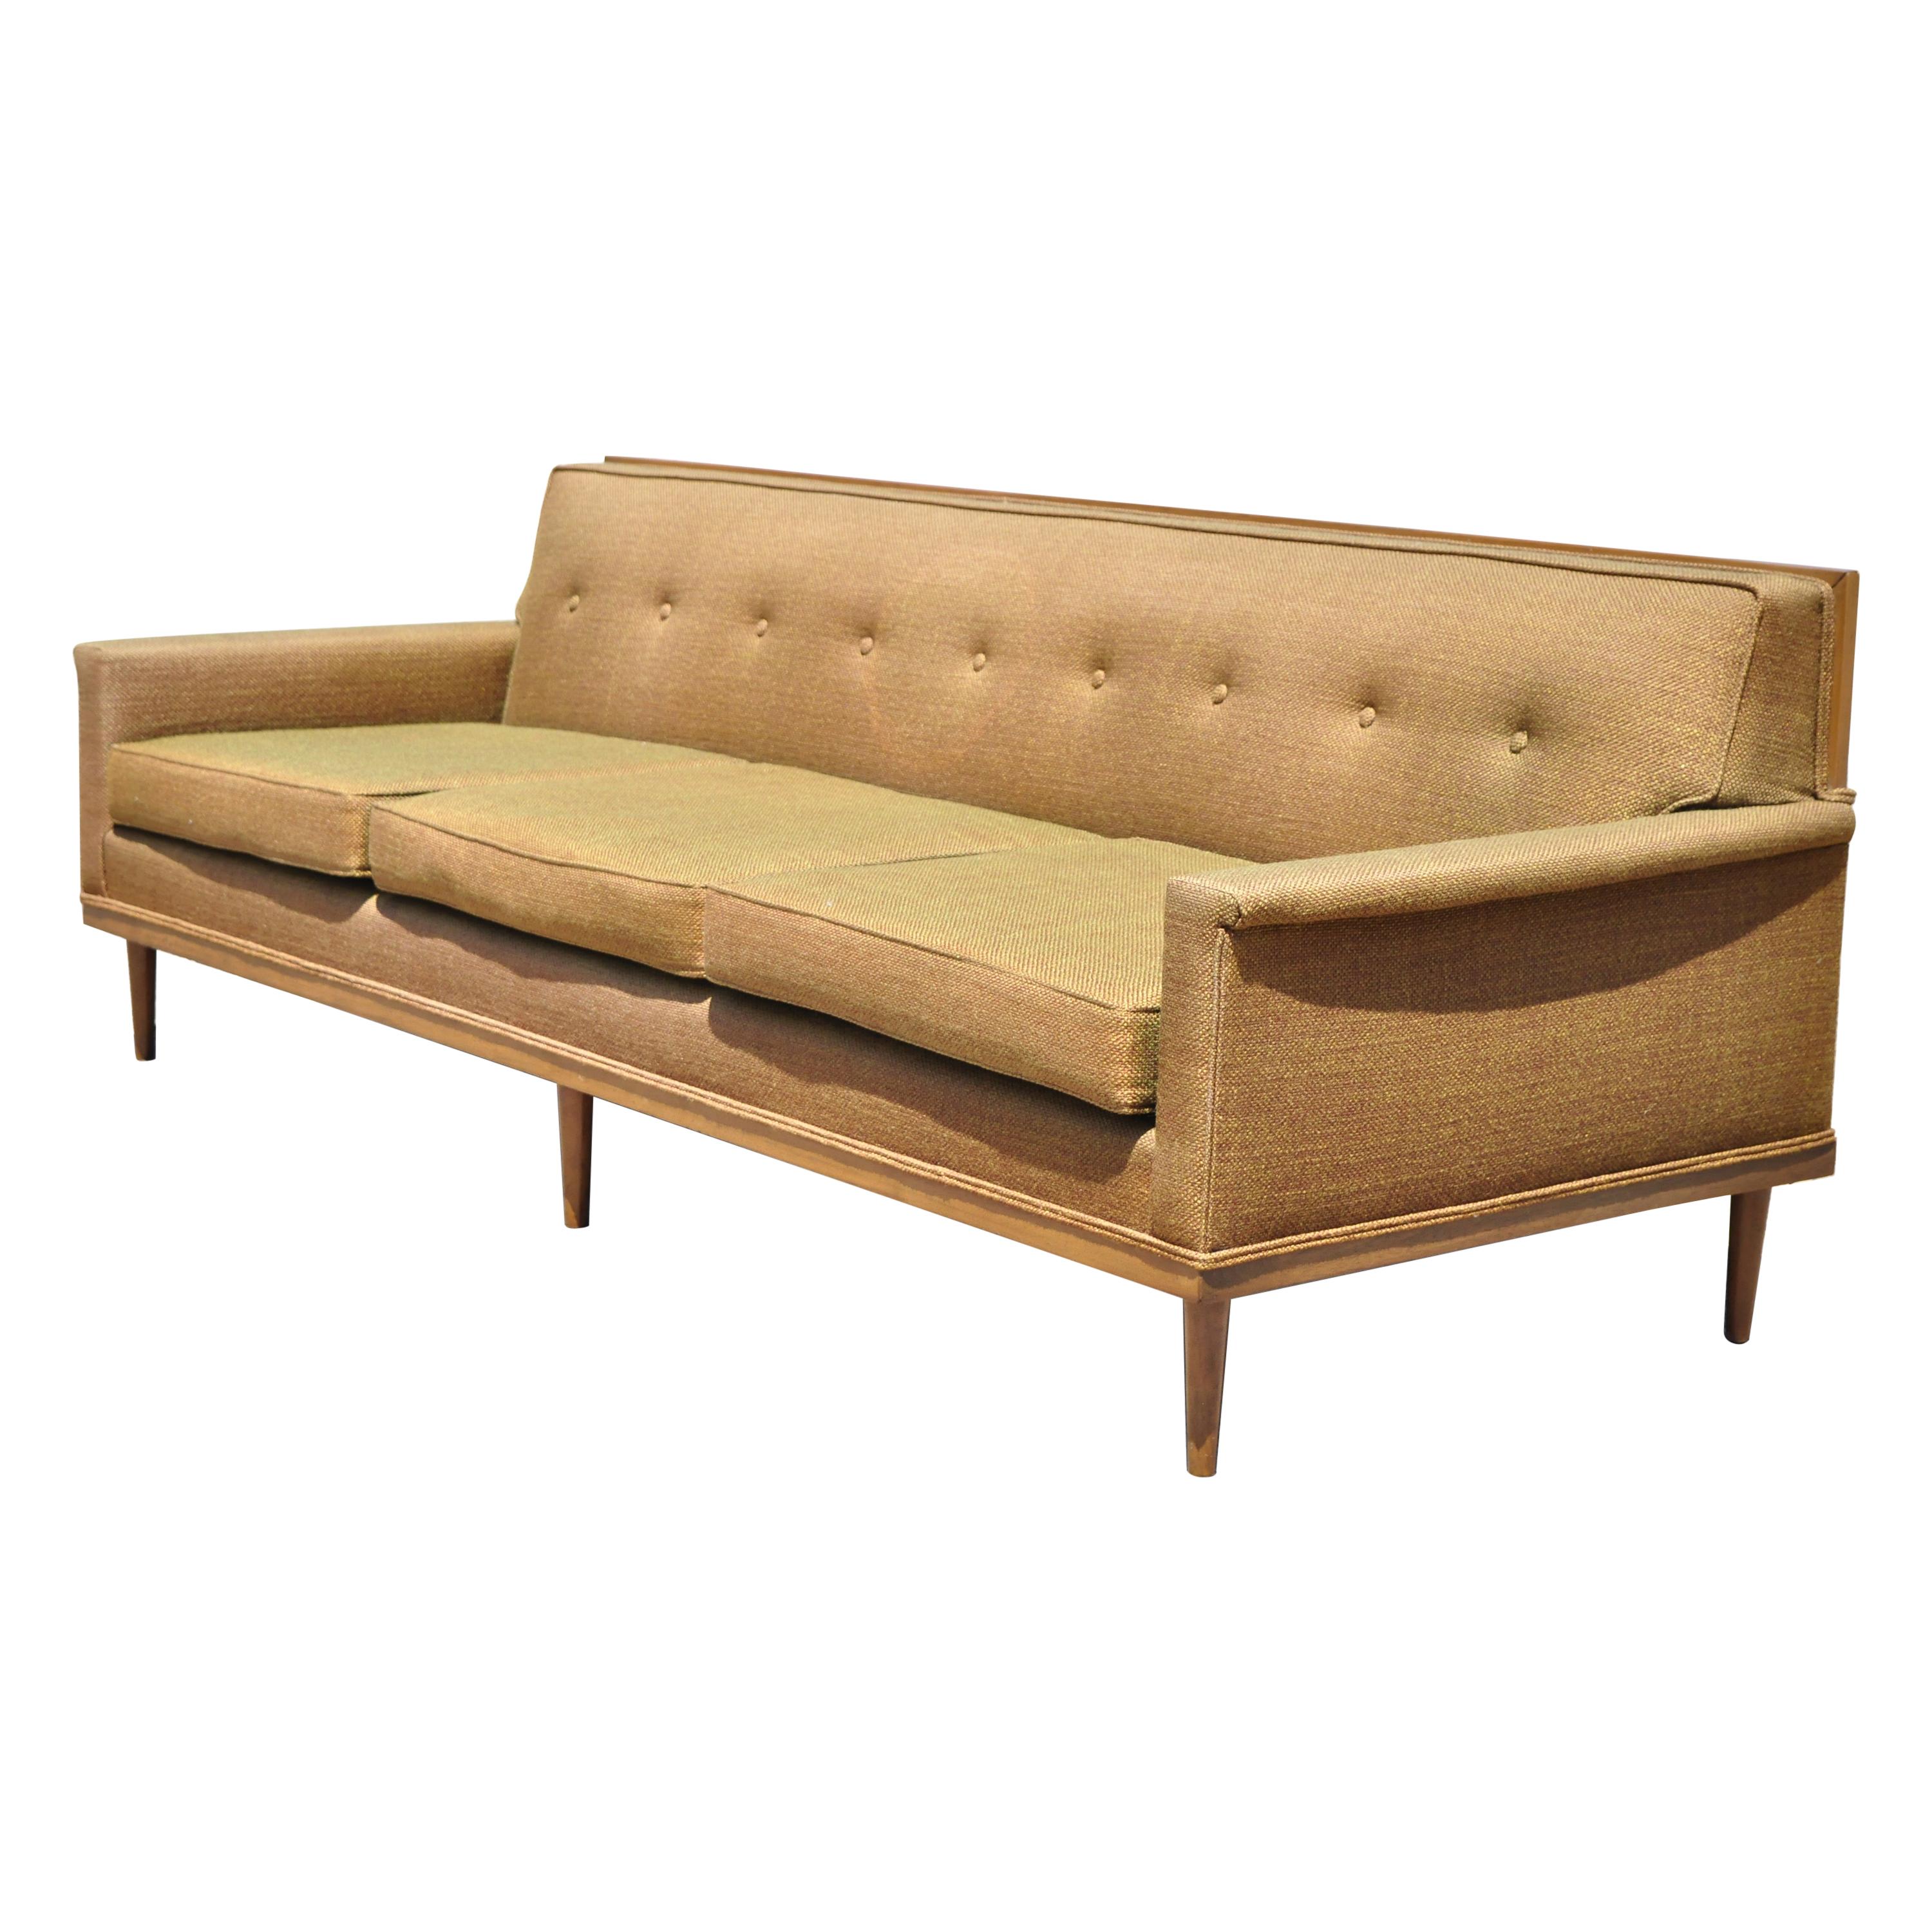 Mid-Century Modern Paul McCobb Style Wood Frame Sofa Couch by J.B. Van Sciver